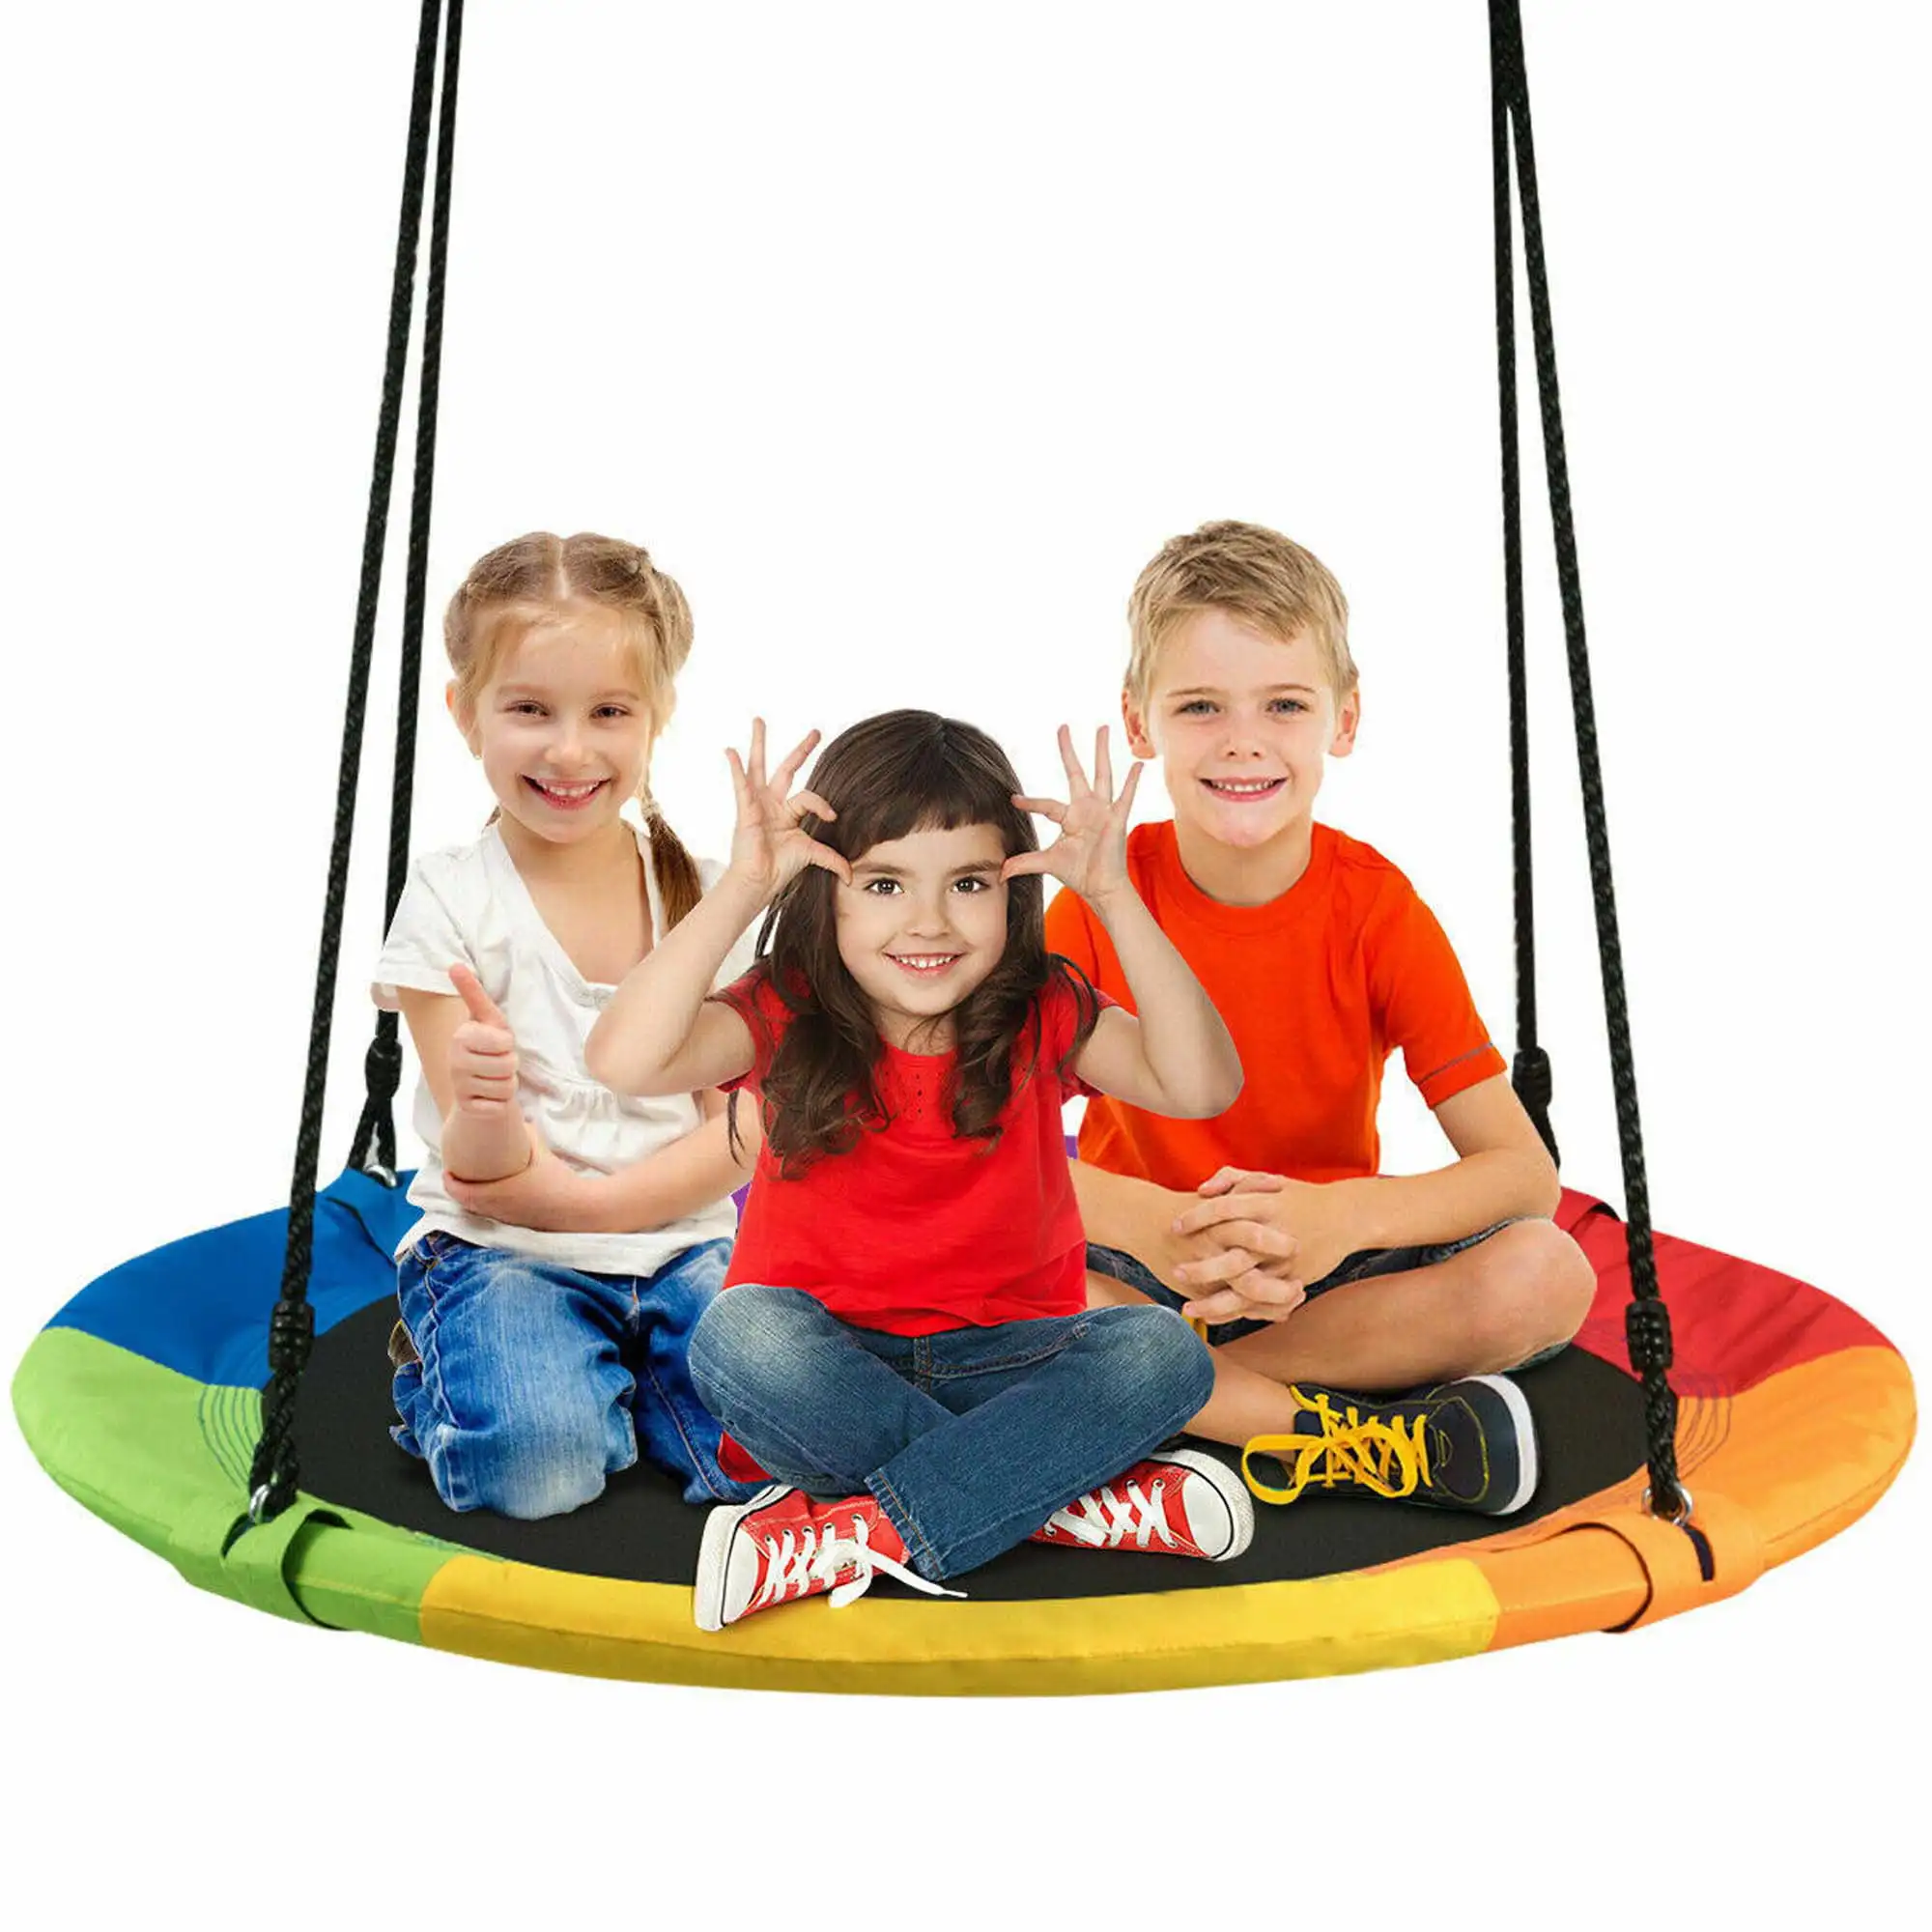 40'' Tree Swing Chair Oxford Web Net Round Hanging Rope Tire Saucer for Kids Outdoor, Colorful